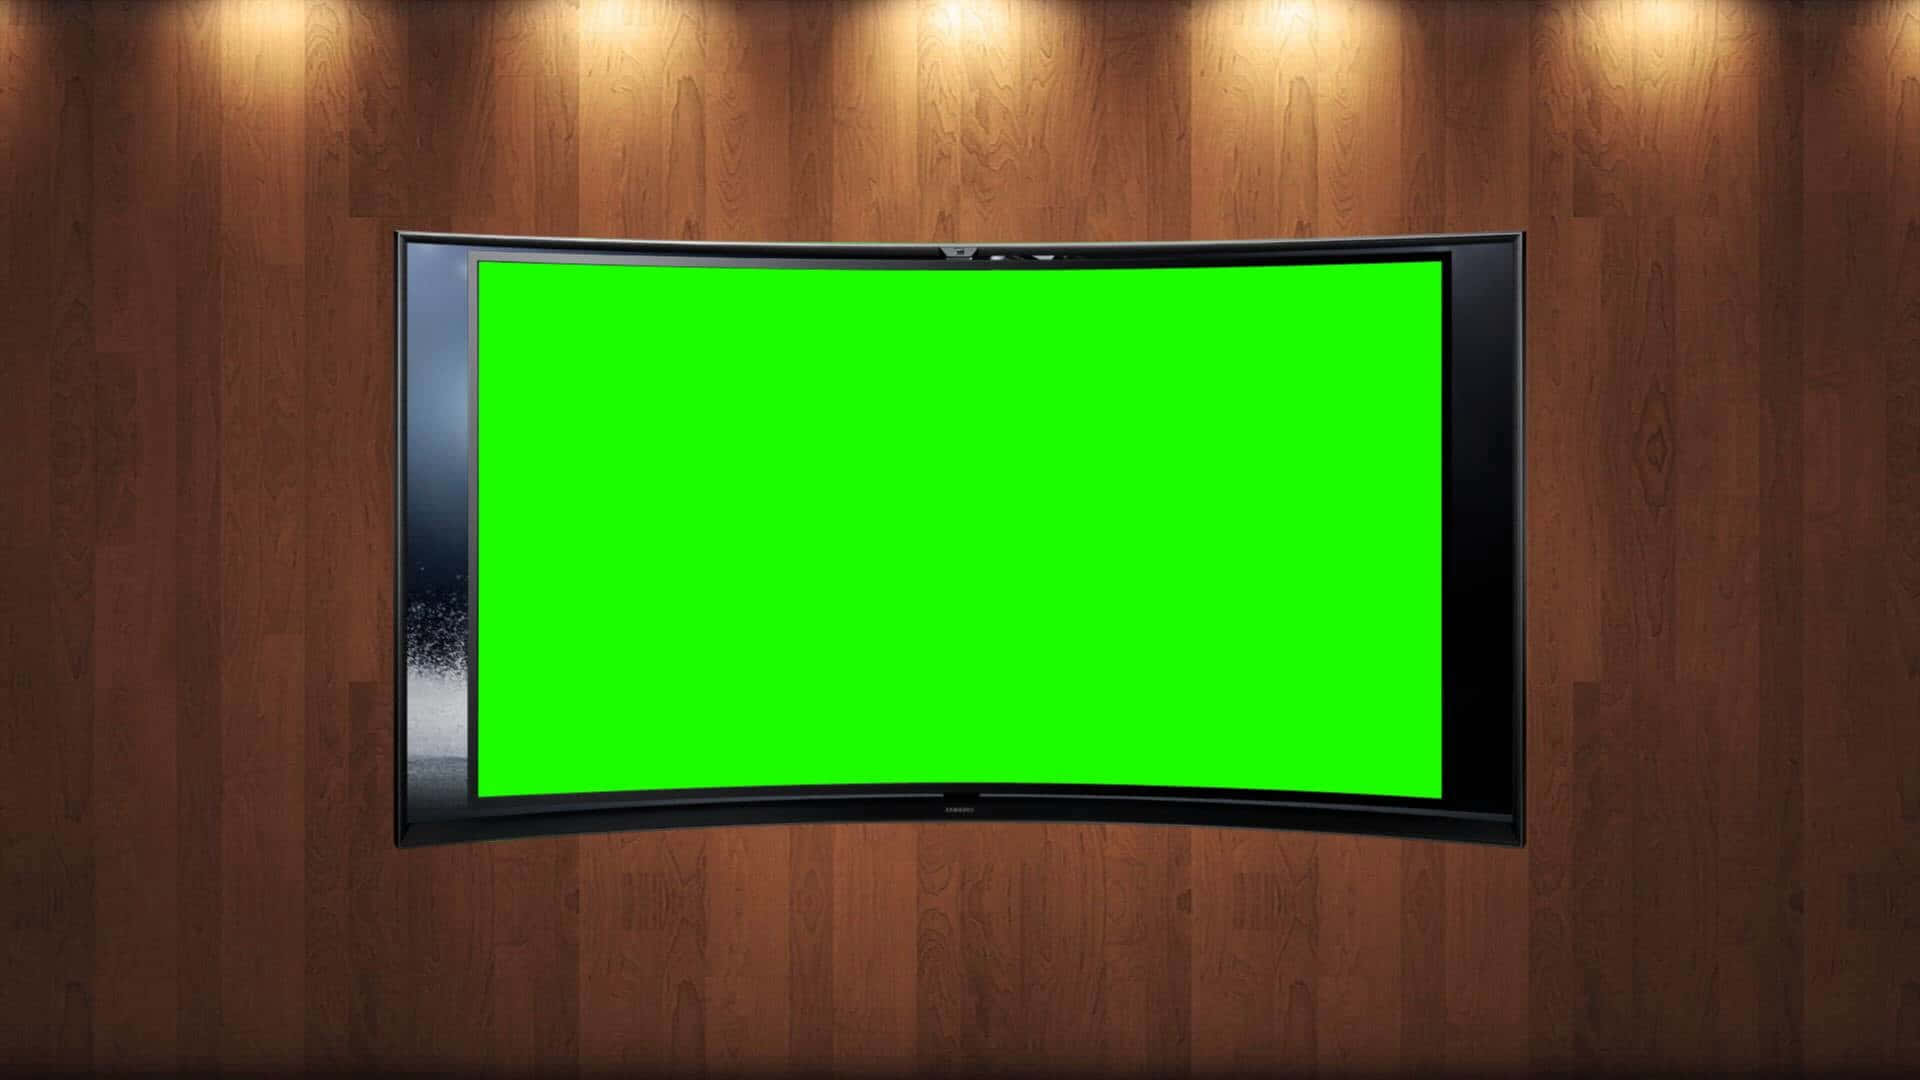 A Green Screen On A Wooden Wall